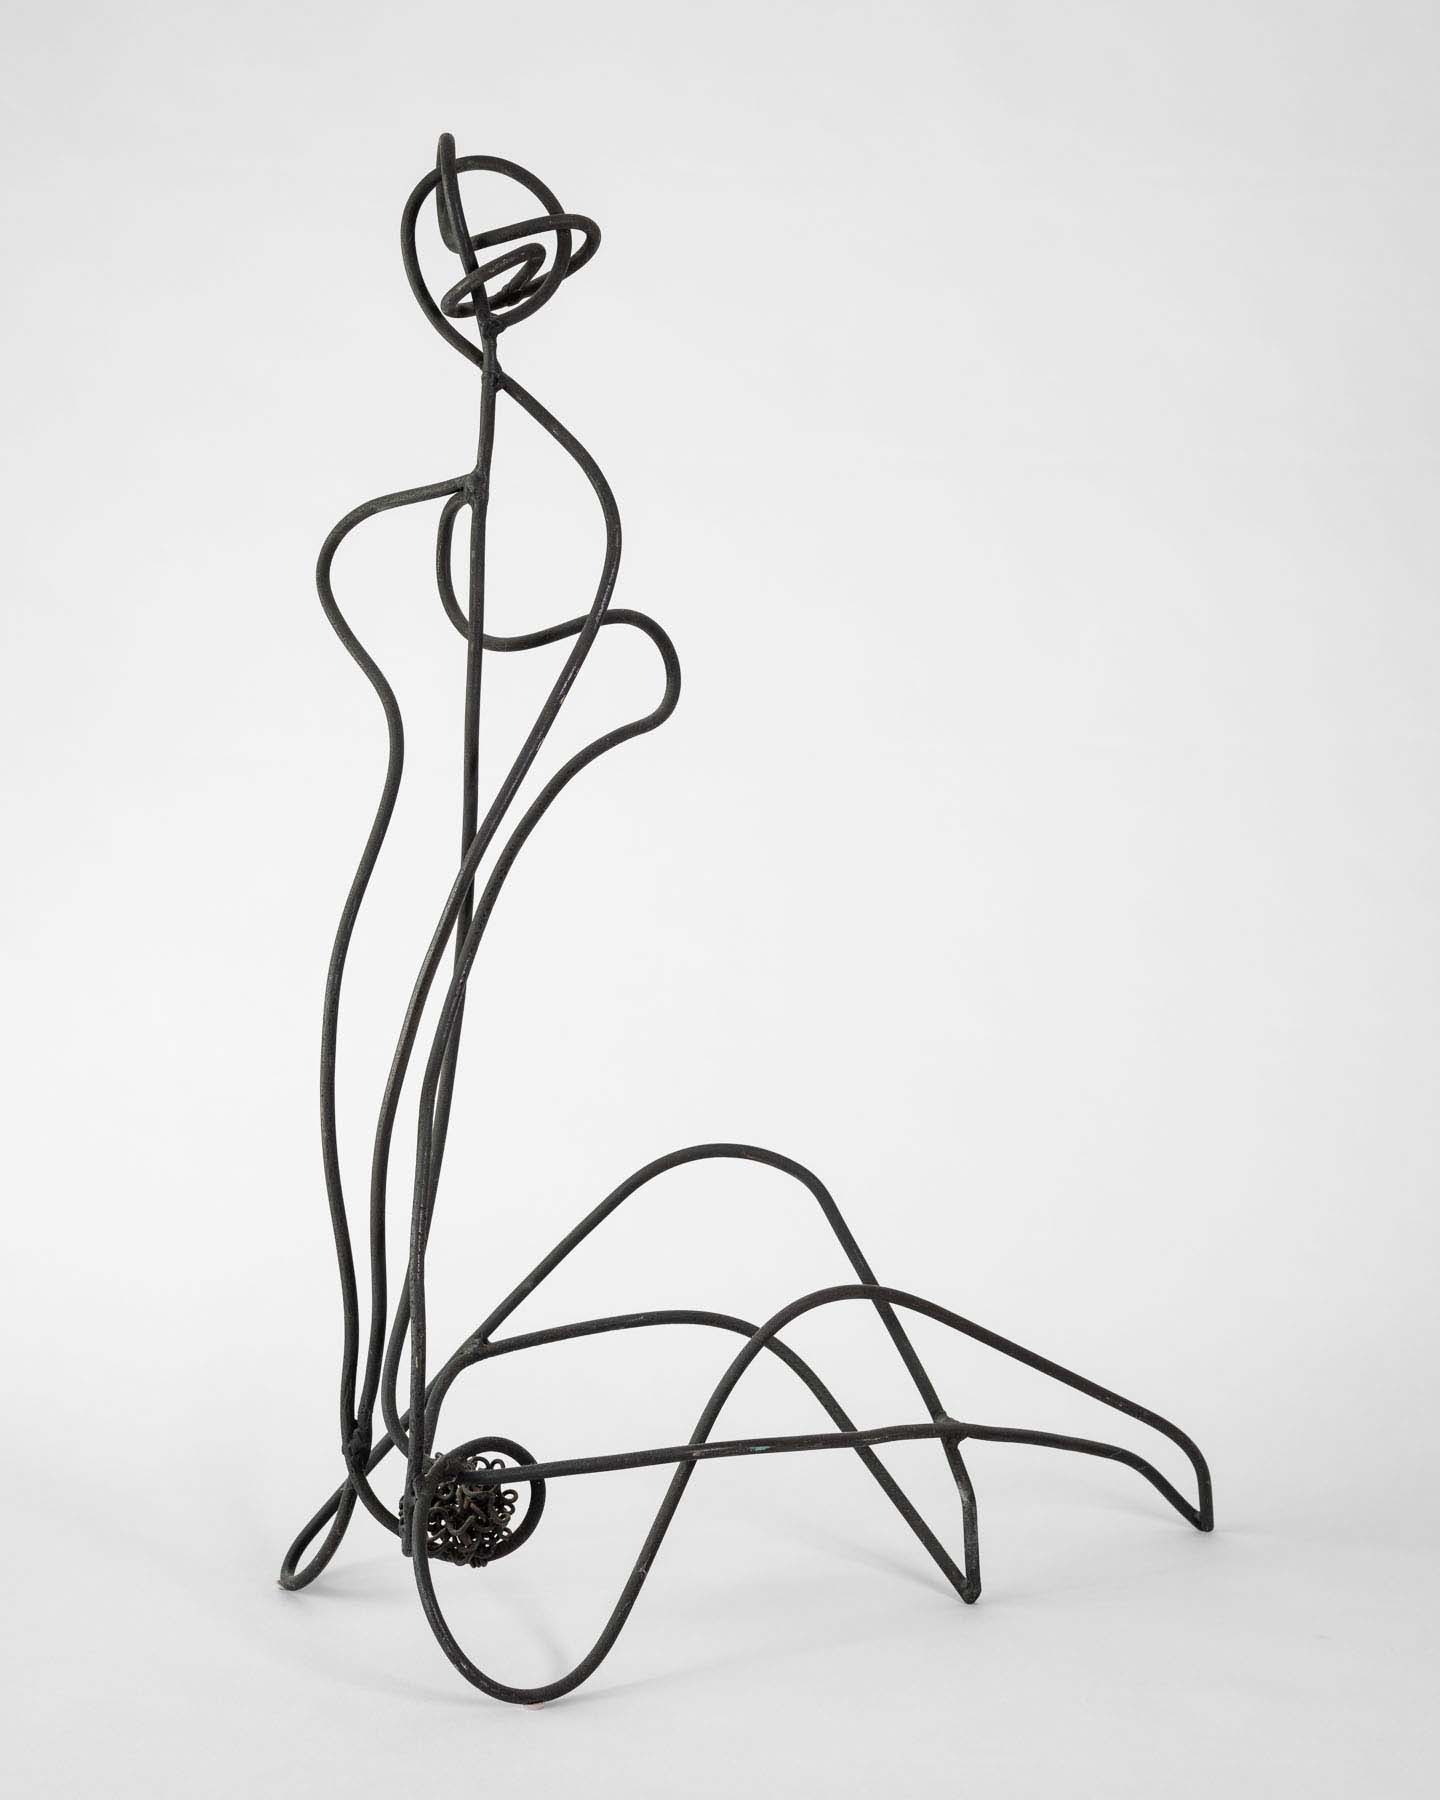 An abstract wire sculpture of a seated figure.